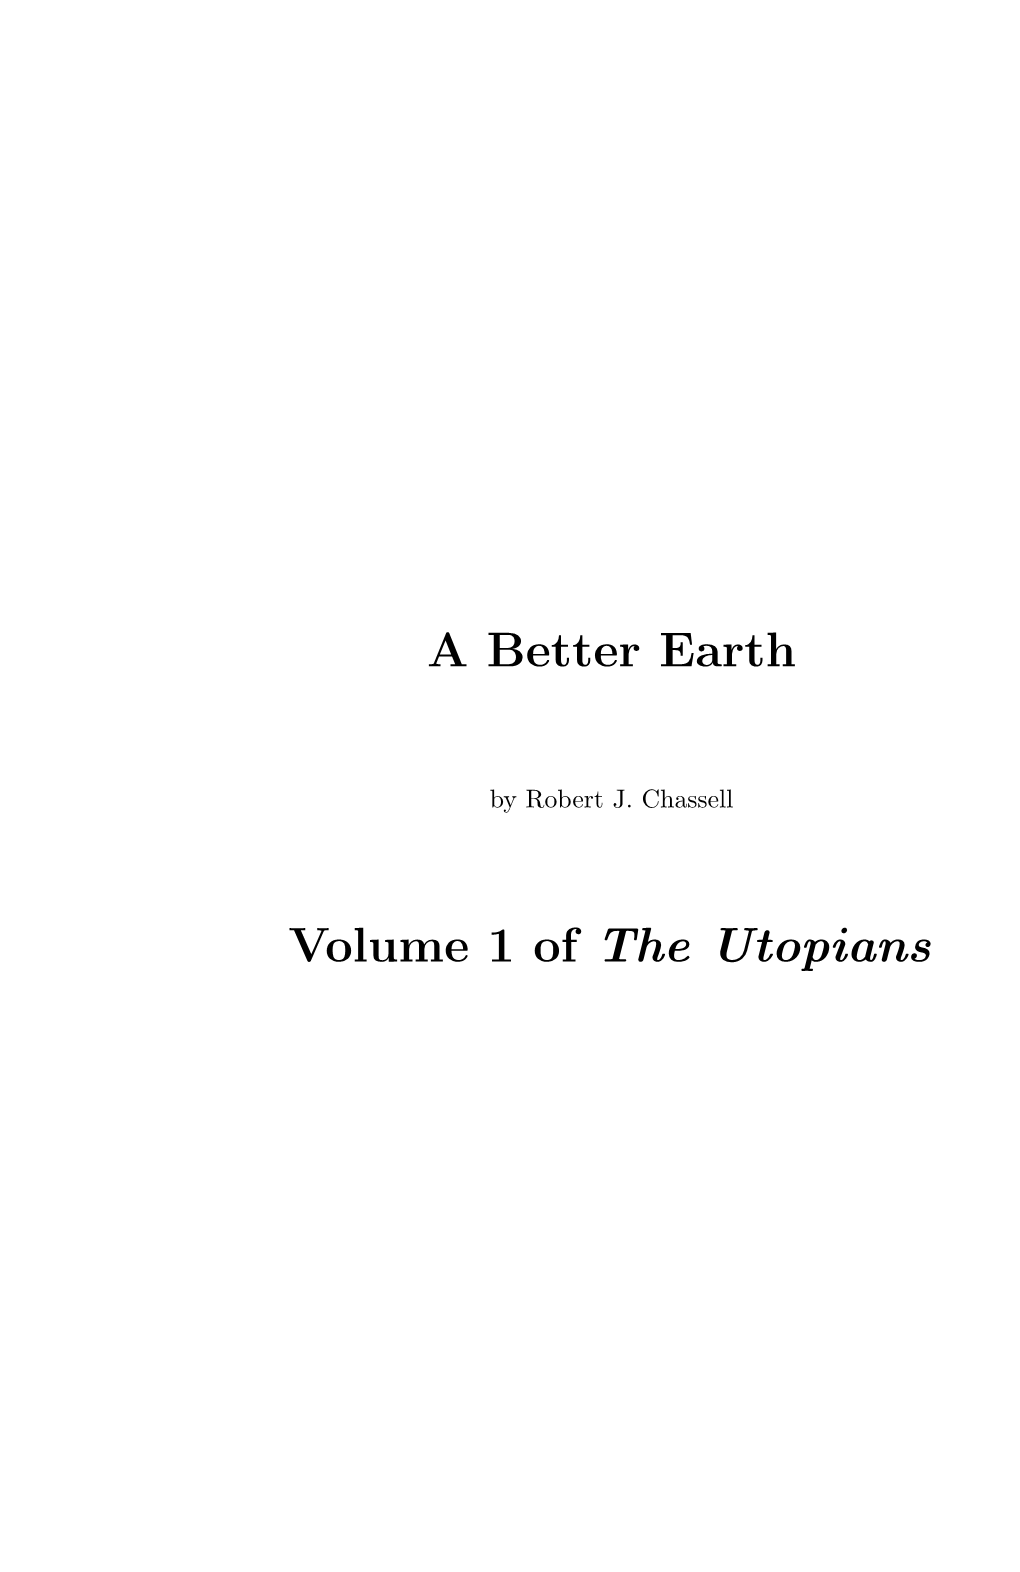 A Better Earth Volume 1 of the Utopians